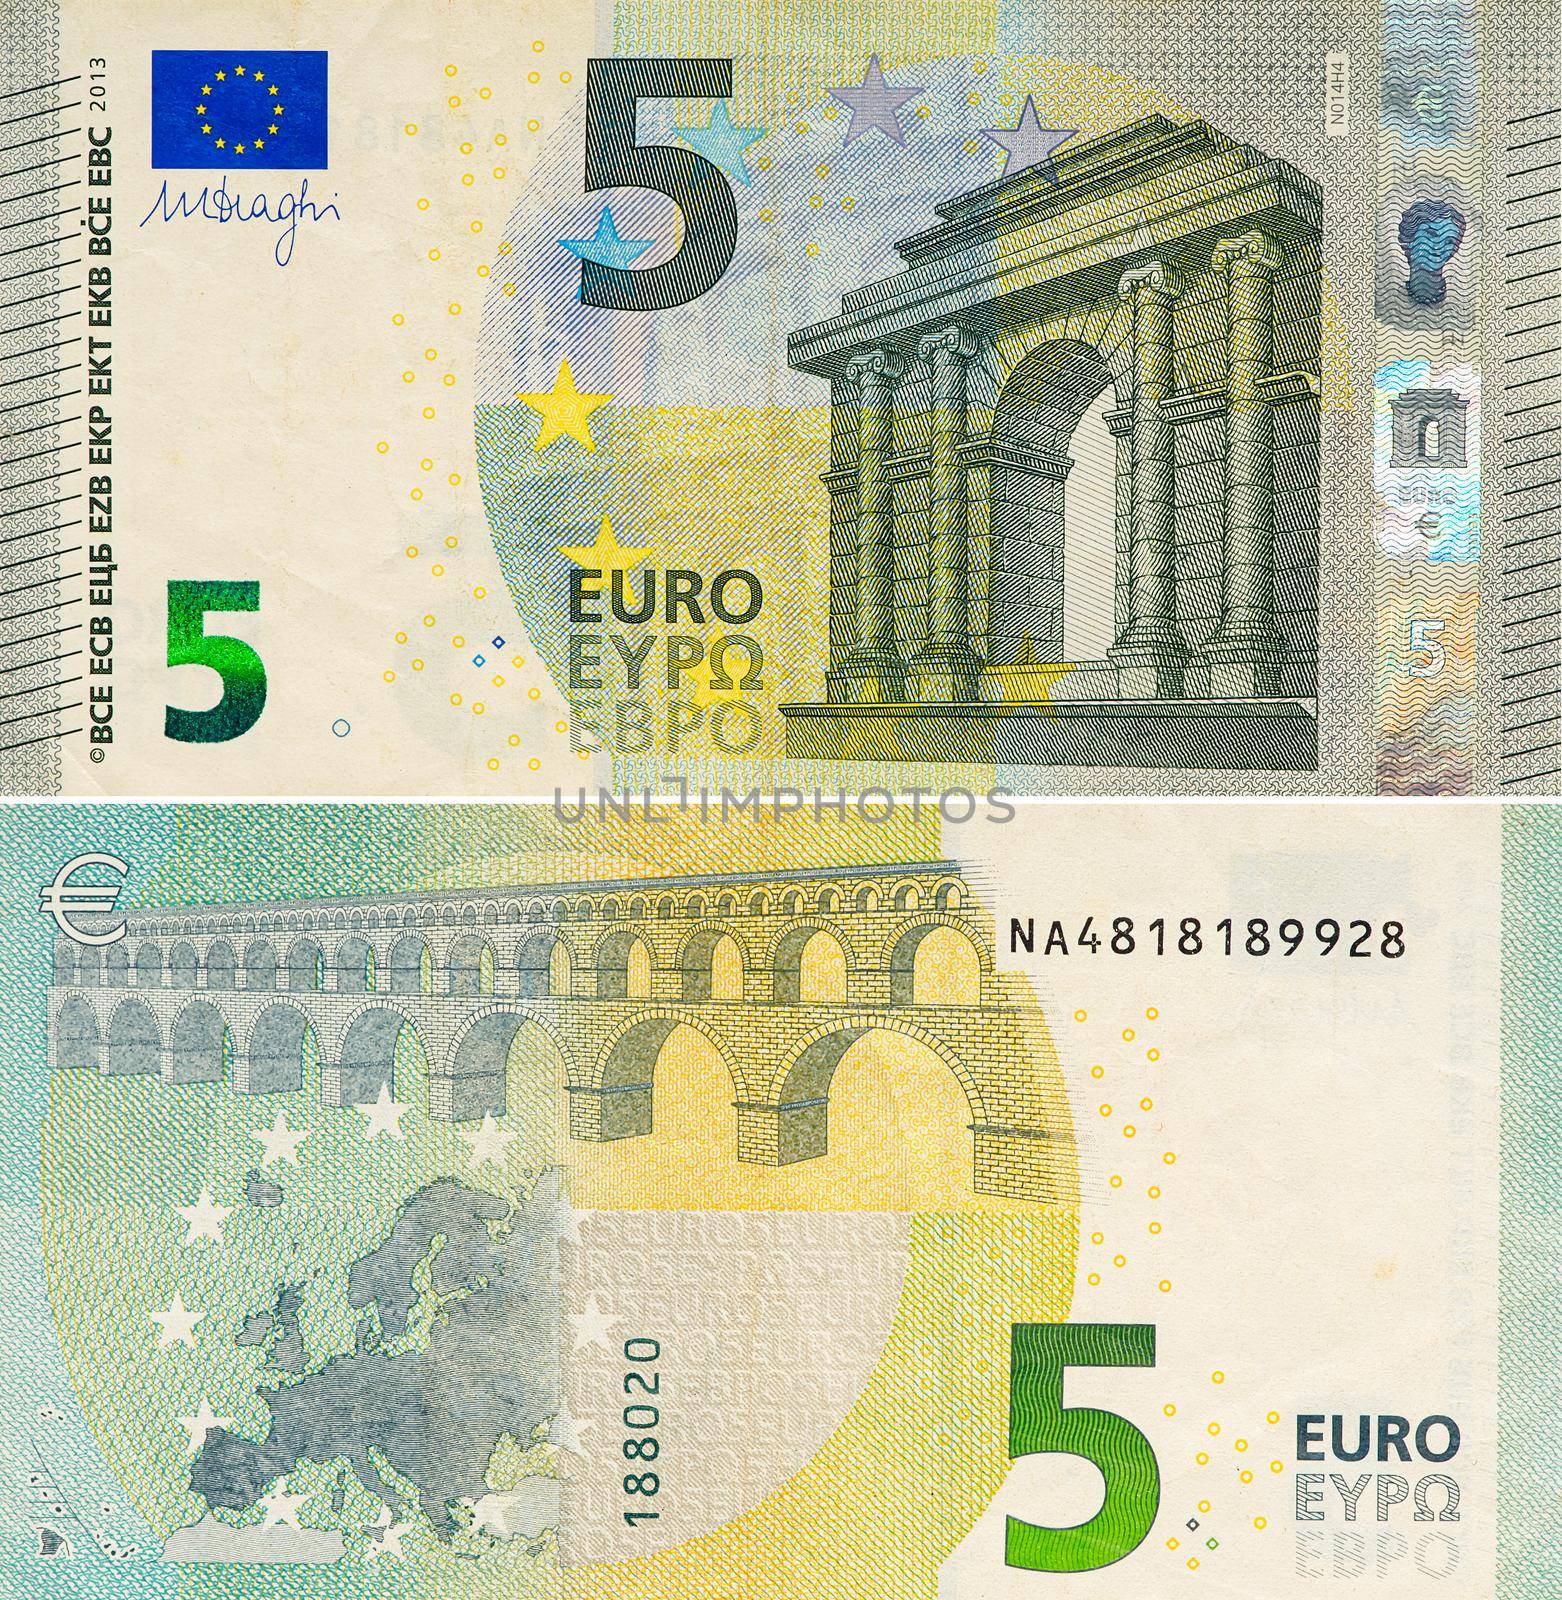 One five Euro bill. 5 euro banknote close-up. The euro is the official currency of 19 out of the 27 member states of the European Union